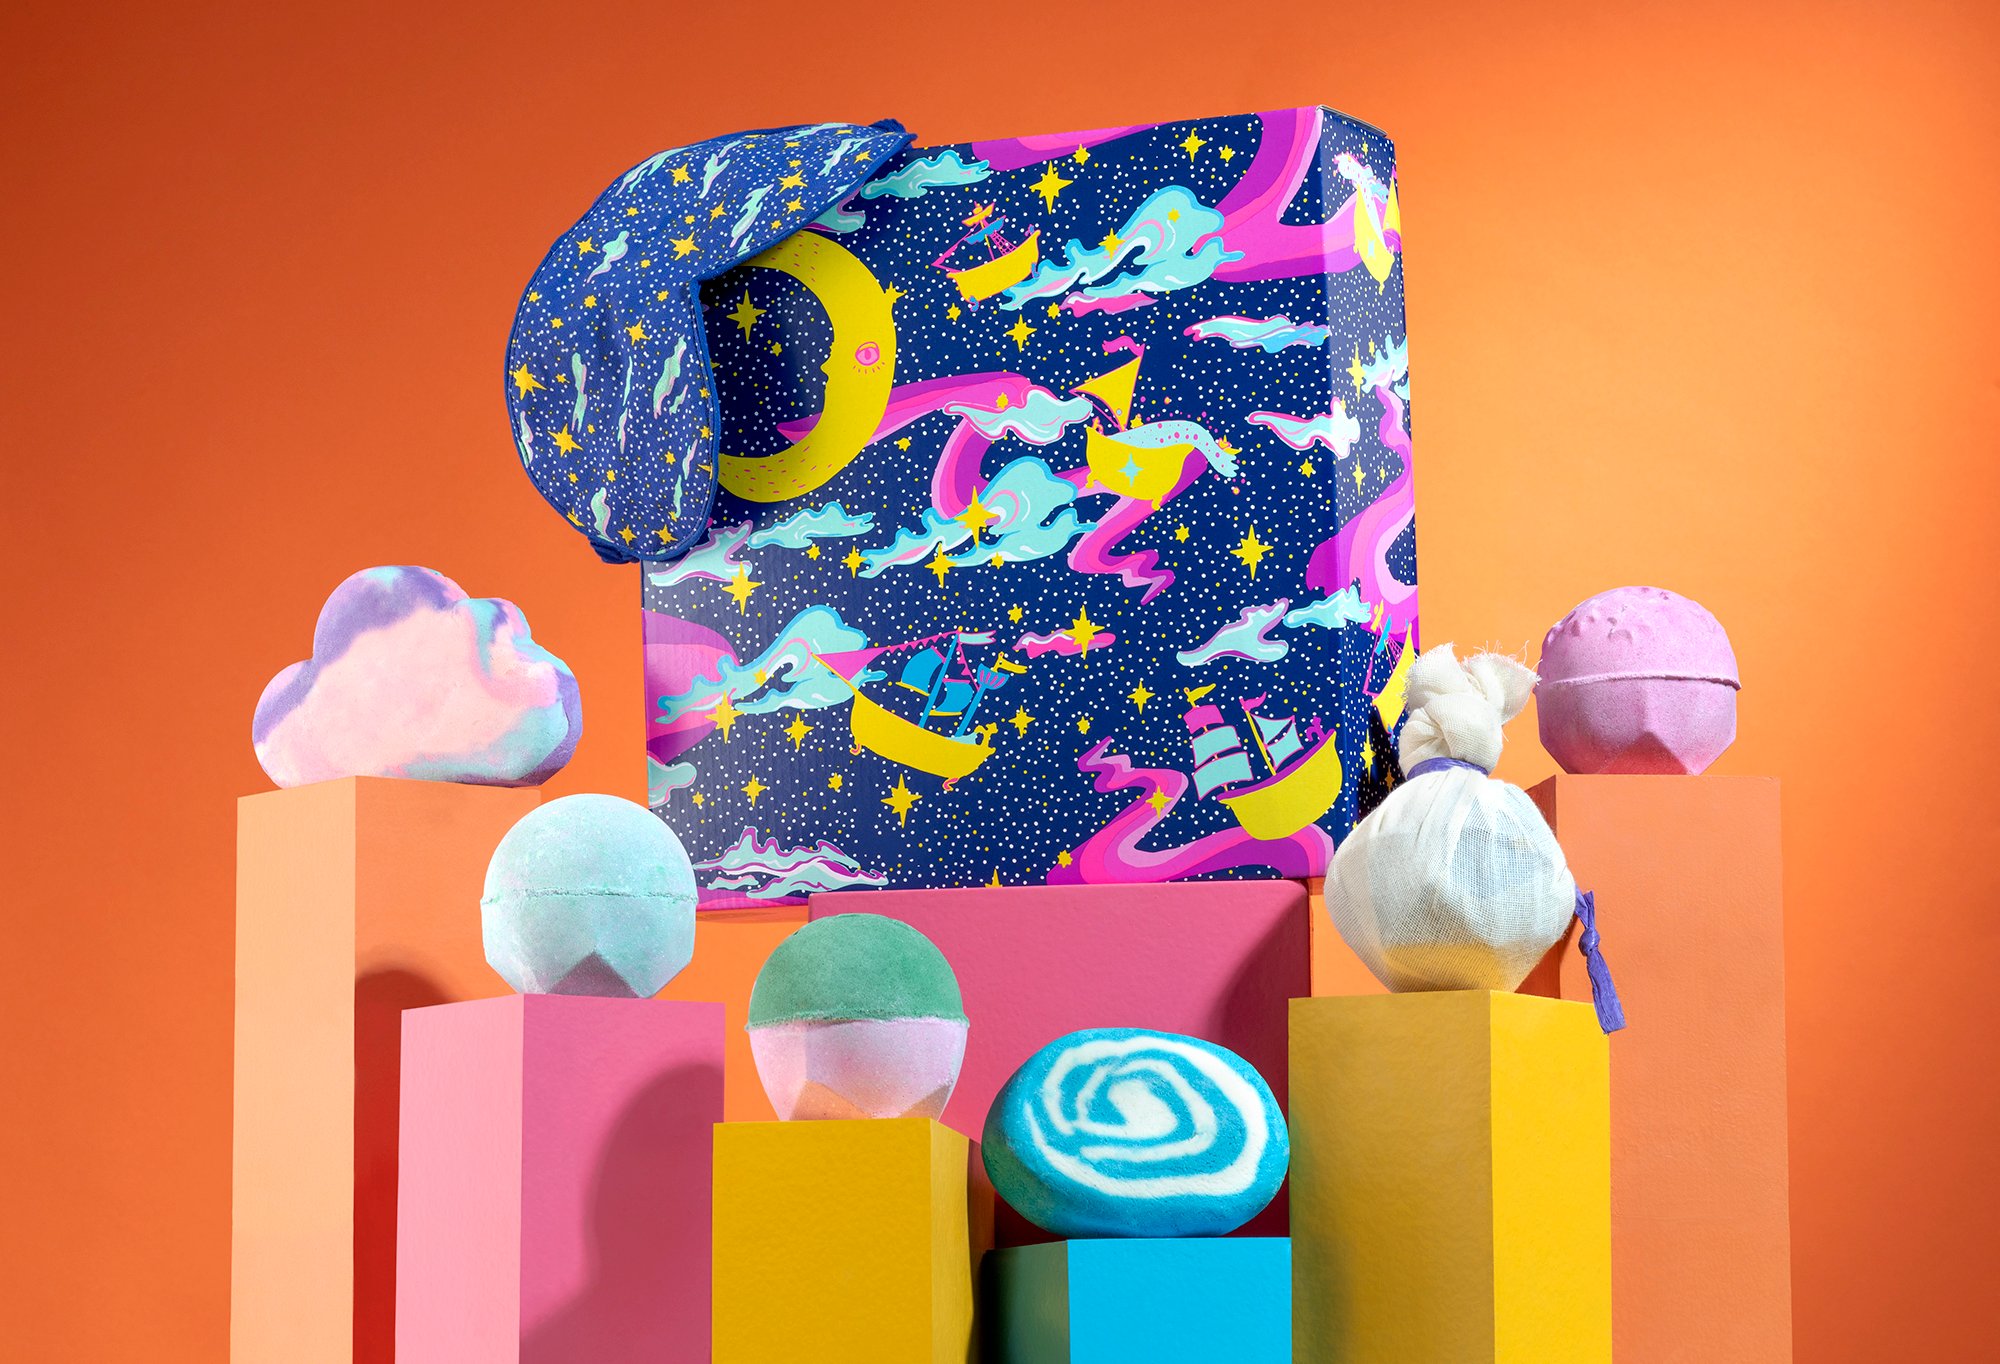 Dreamland gift, in front of an orange background, surrounded by its products on pink, orange, yellow and blue plinths.